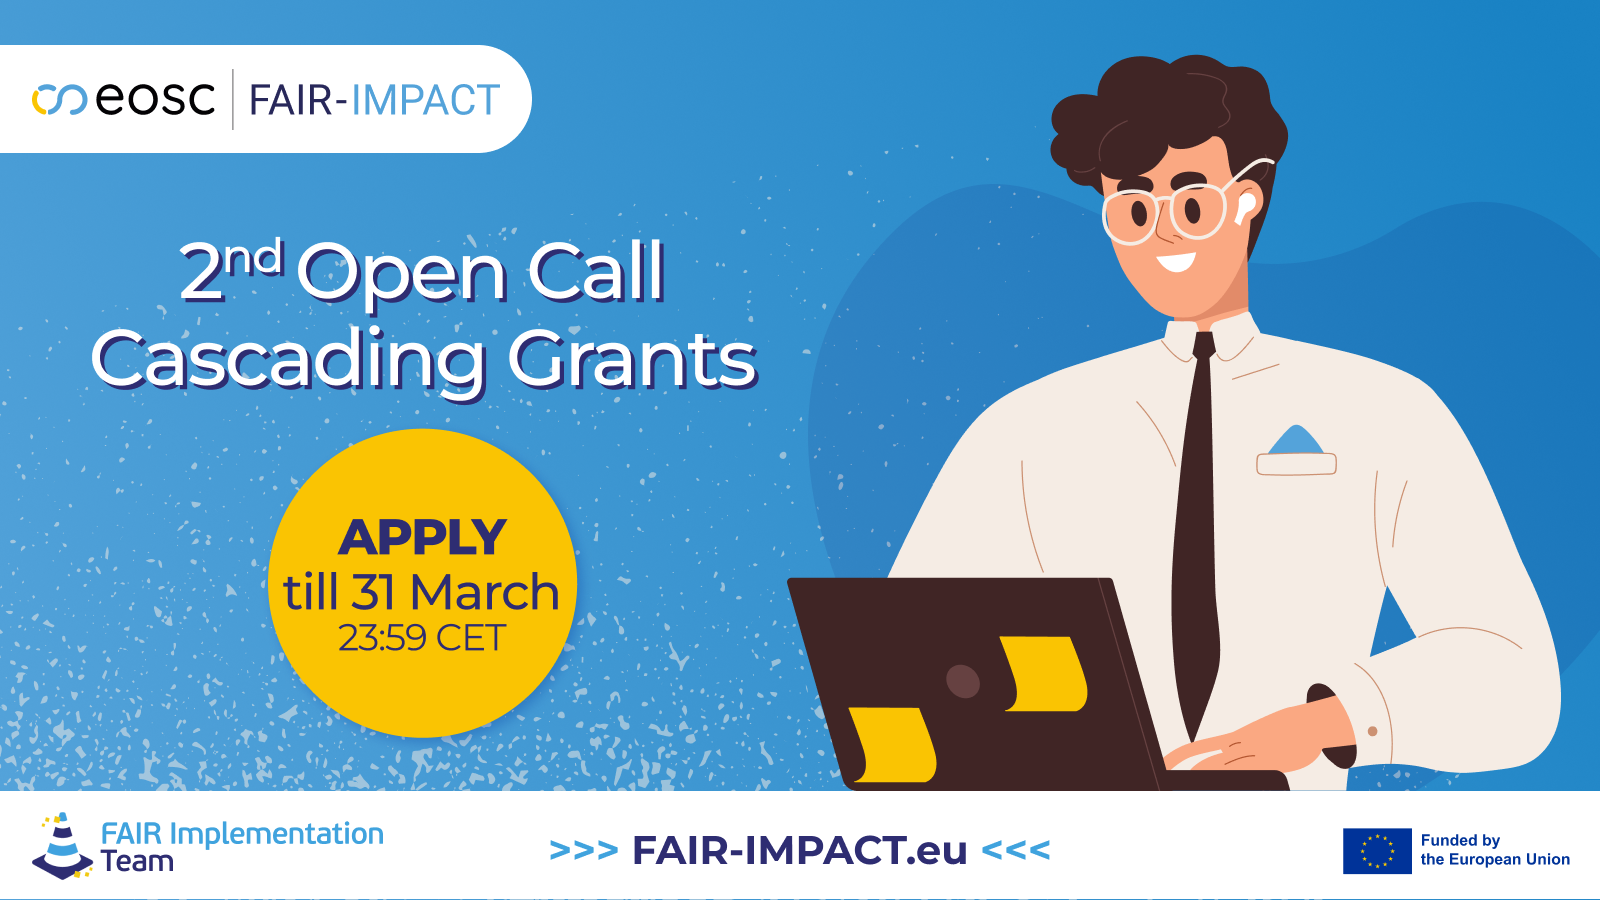 FAIR-IMPACT – 2nd Open Call for support: Cascading Grants is open till 31st March!